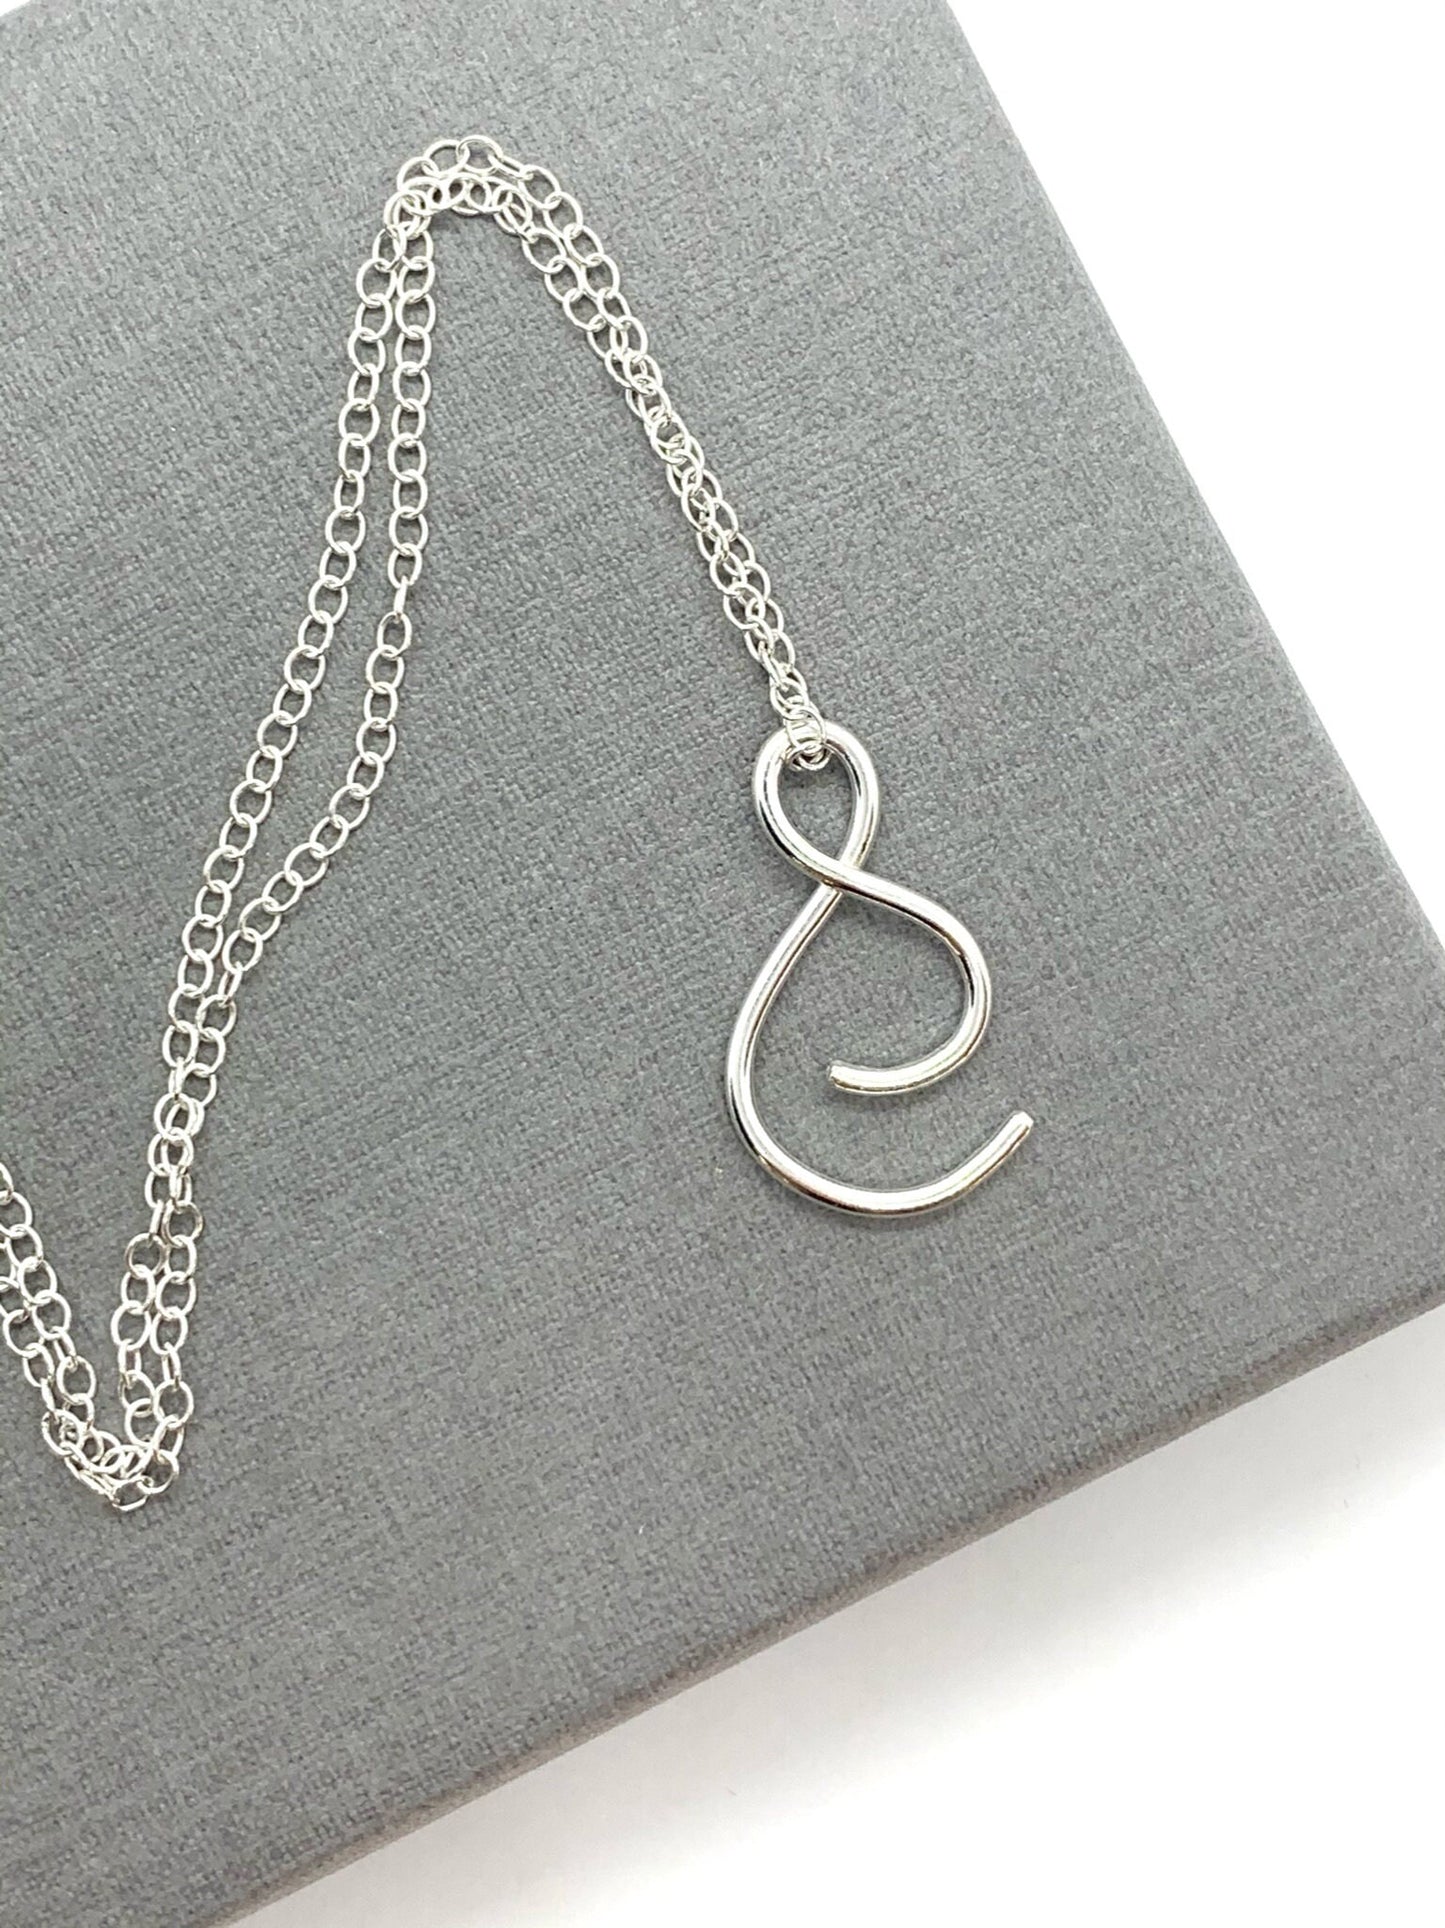 Sterling silver hug necklace, thinking of you gift